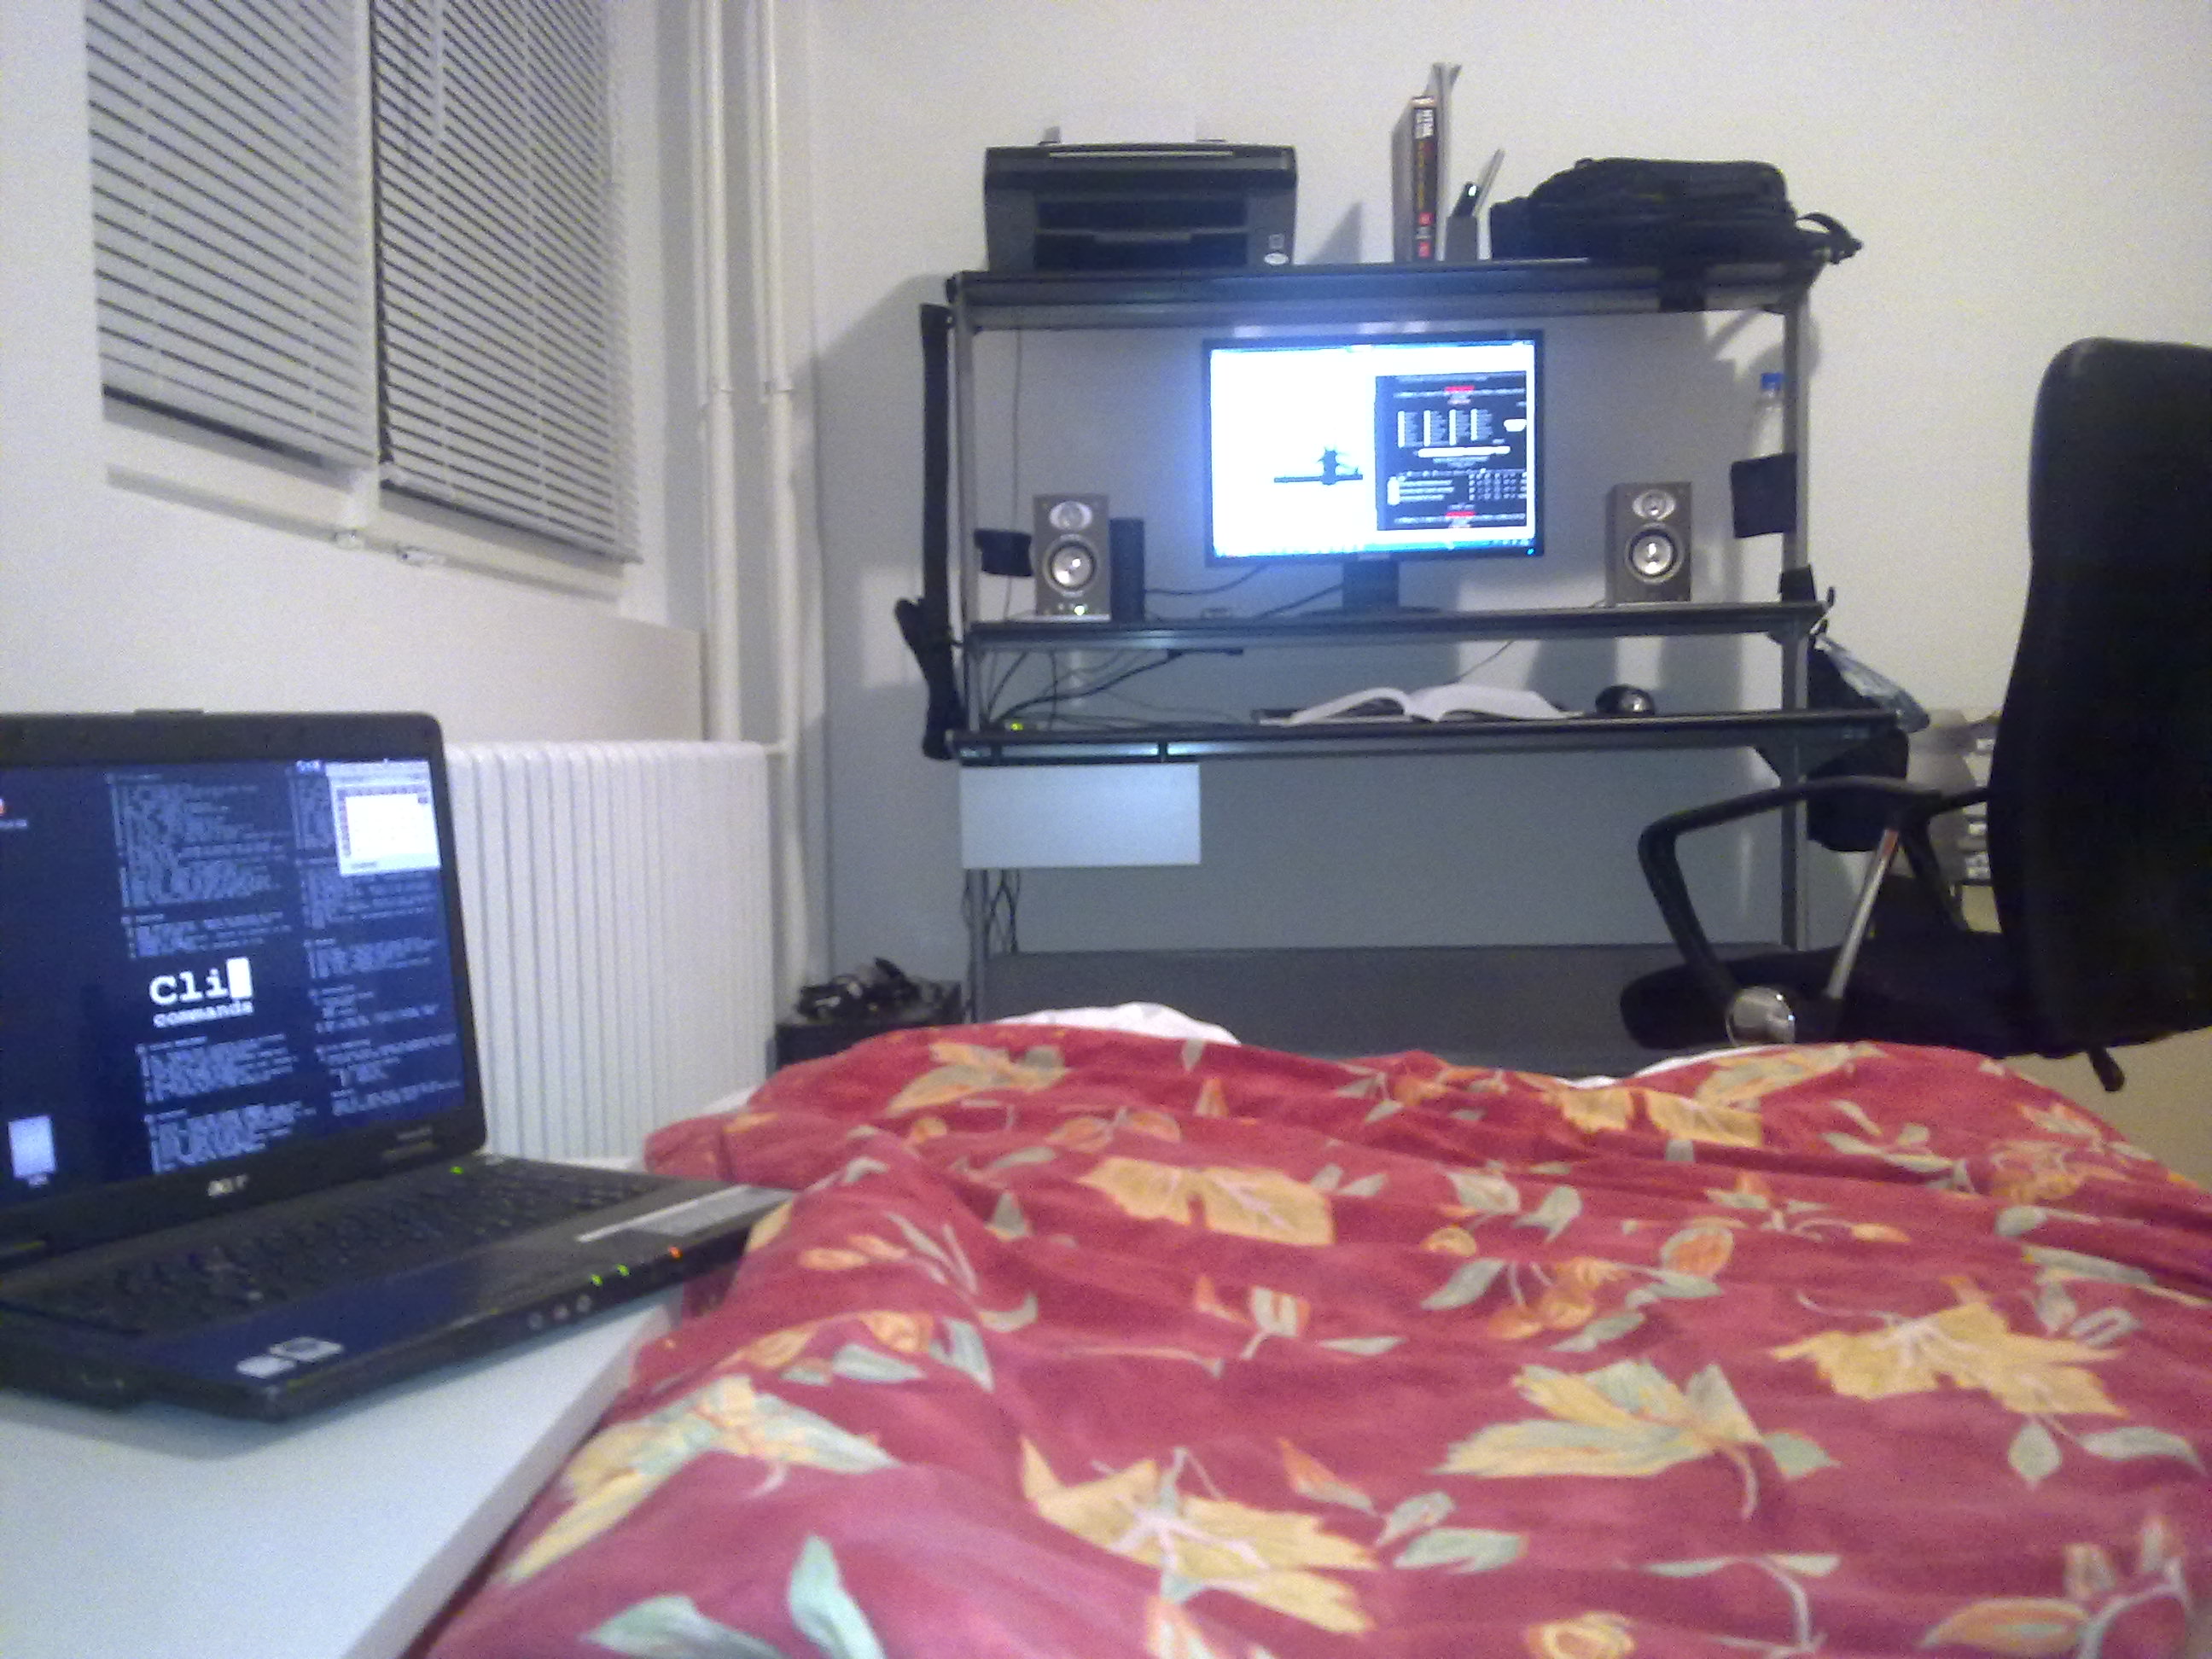 My small room with PC, laptop and a bed.